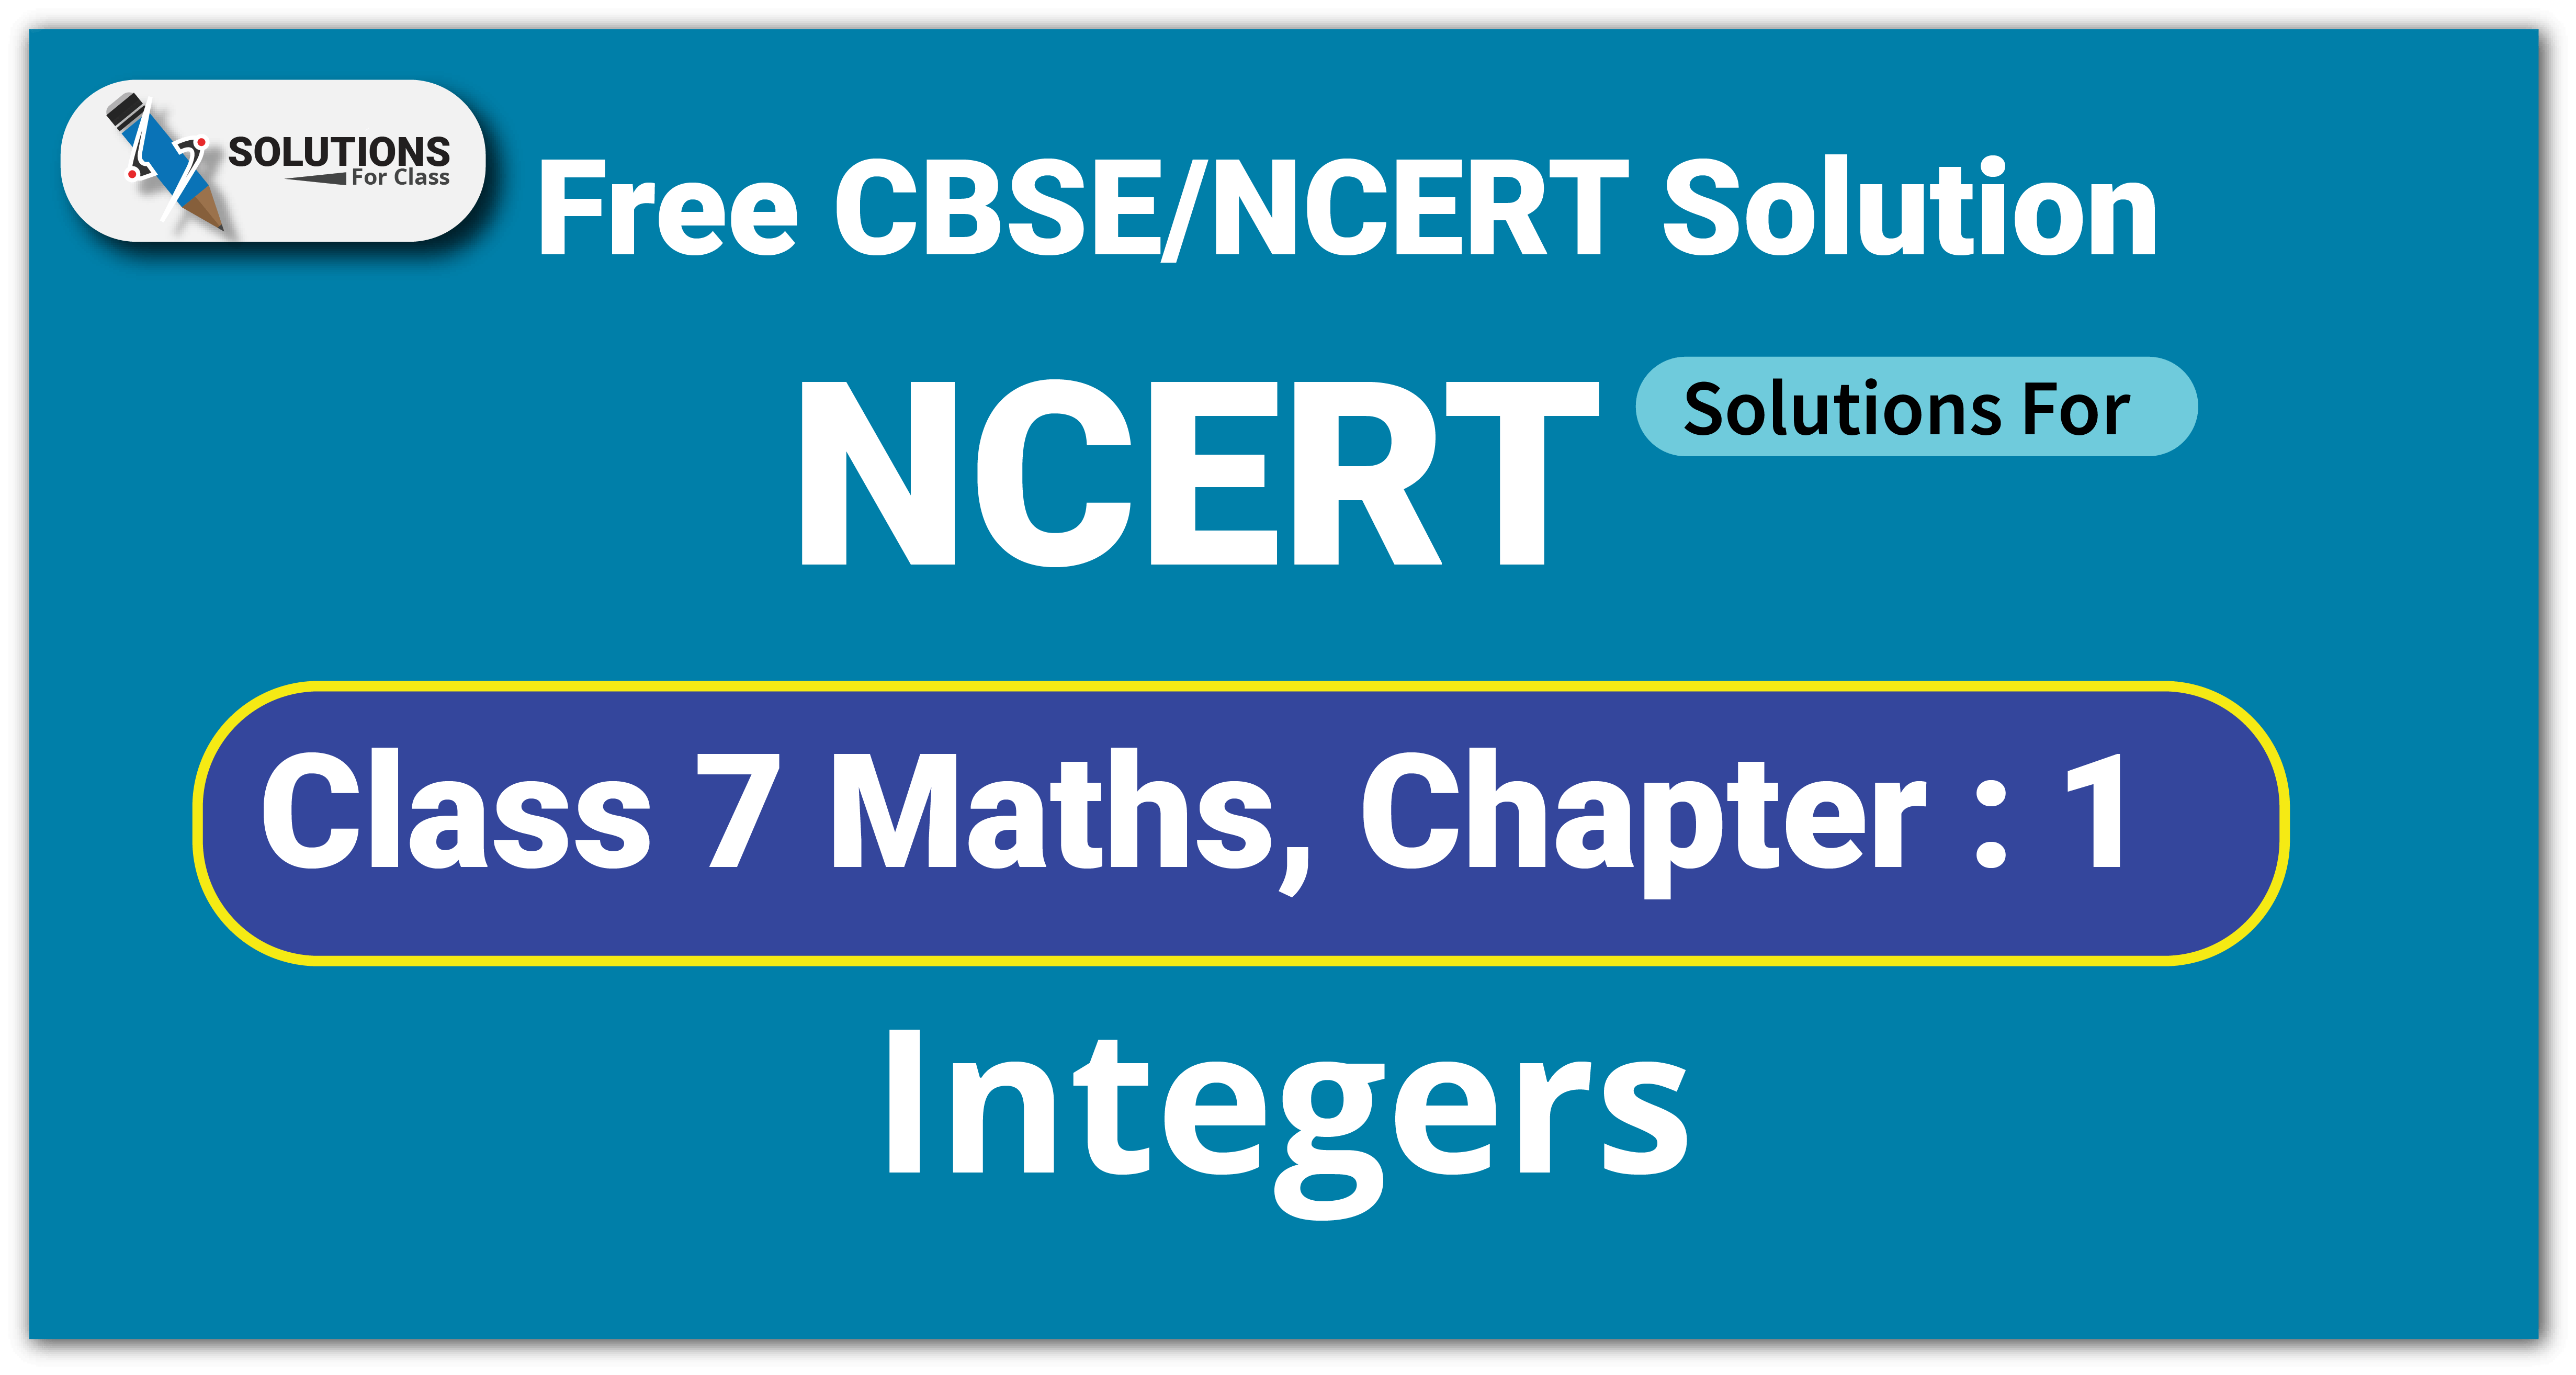 NCERT Solutions For Class 7 Chapter 1 Integers